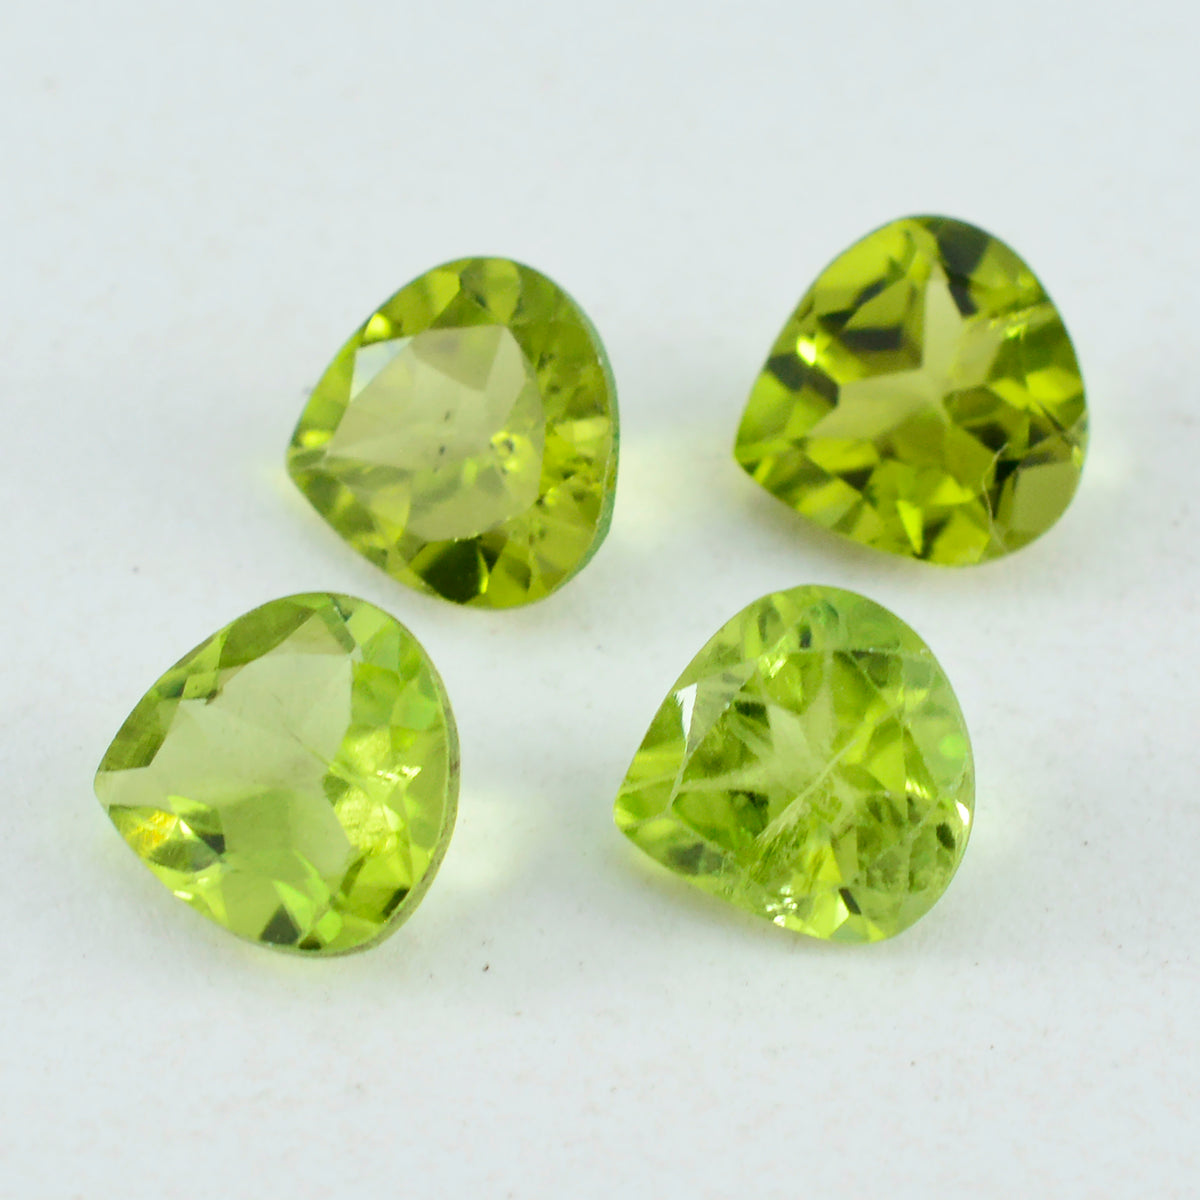 Riyogems 1PC Real Green Peridot Faceted 8x8 mm Heart Shape A Quality Loose Gems